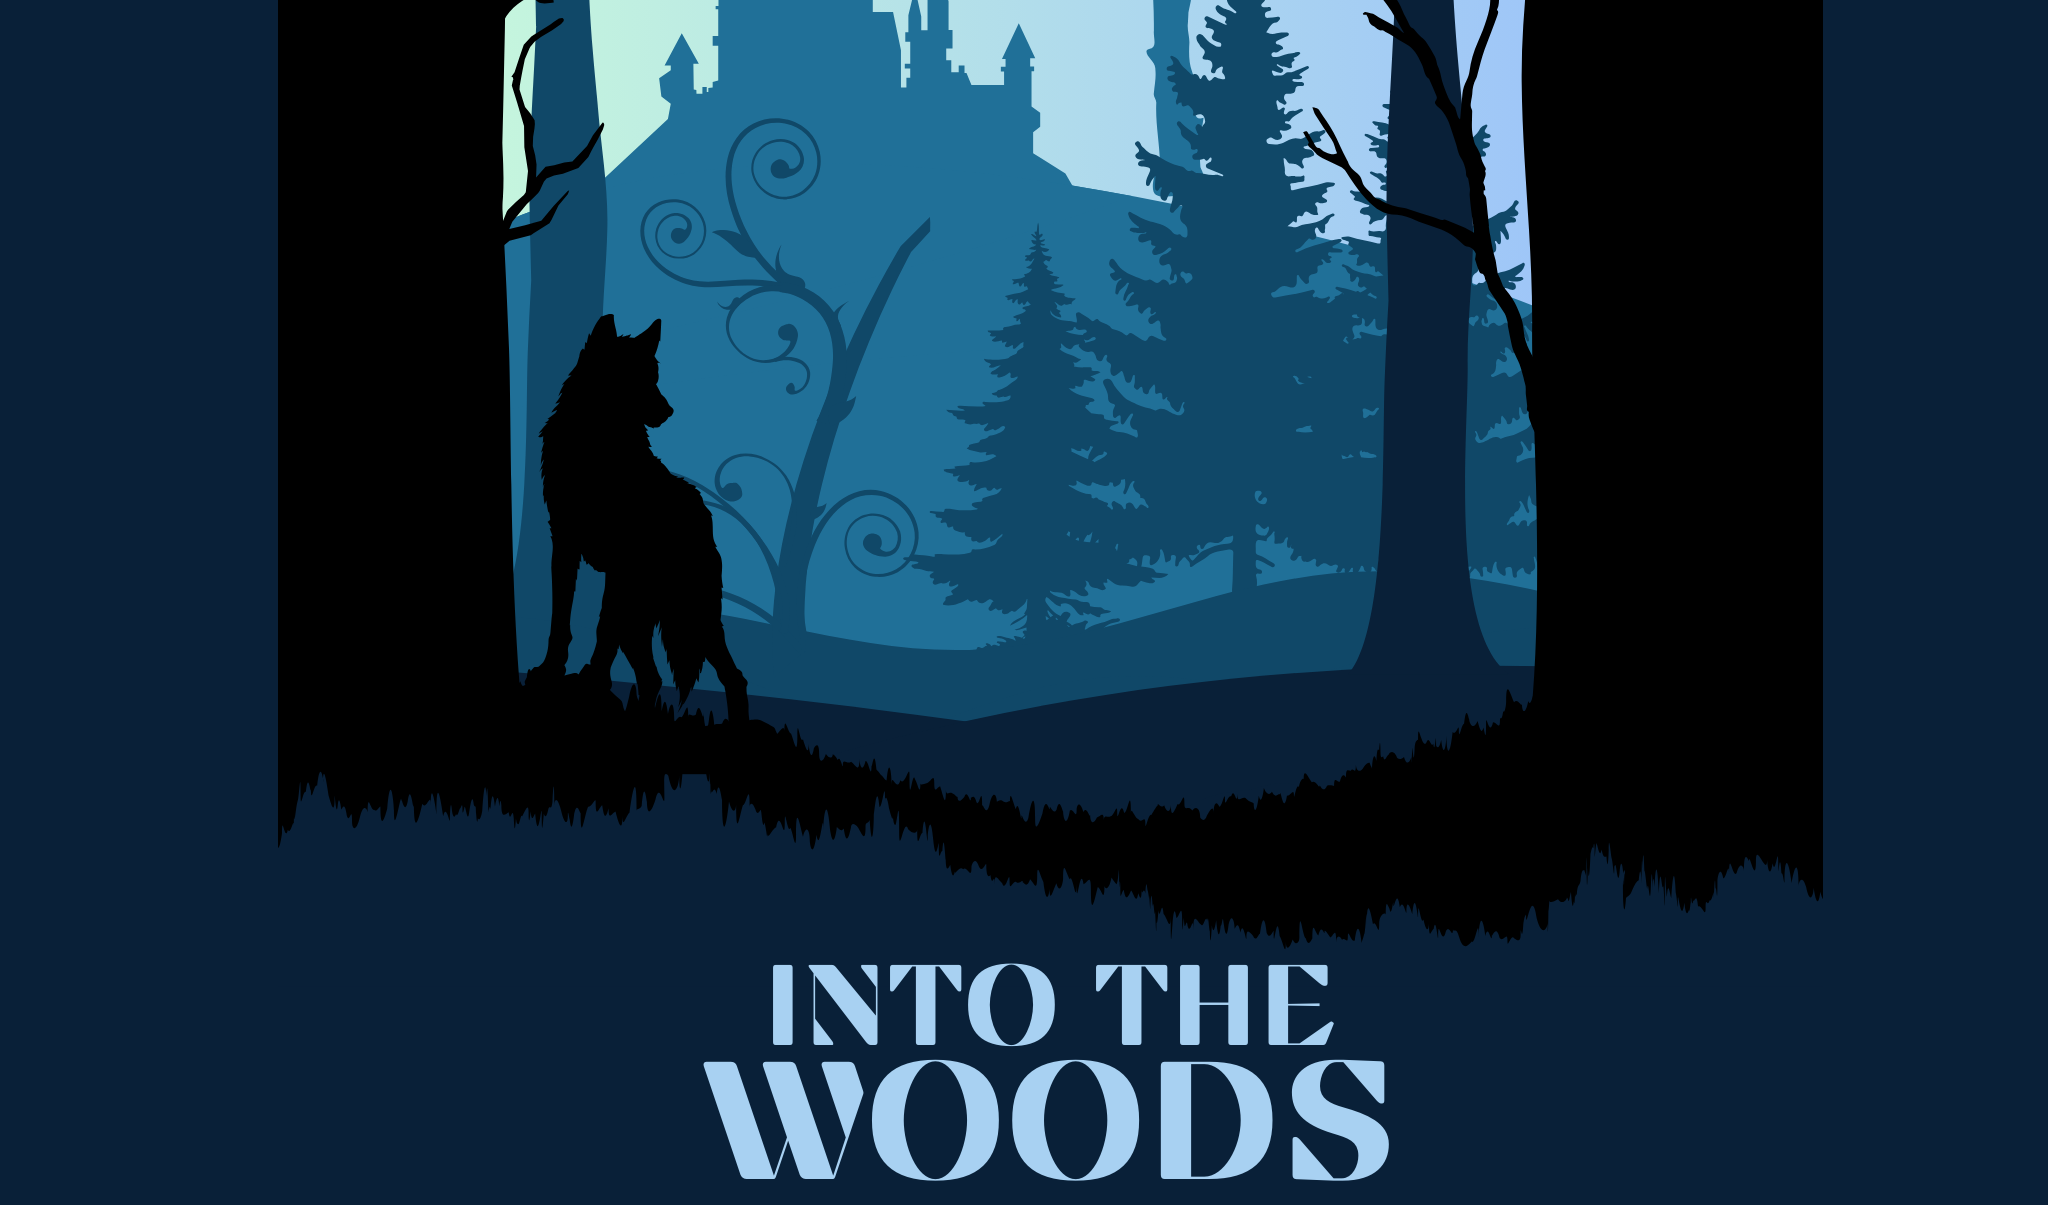 Featured image for “Into the Woods”